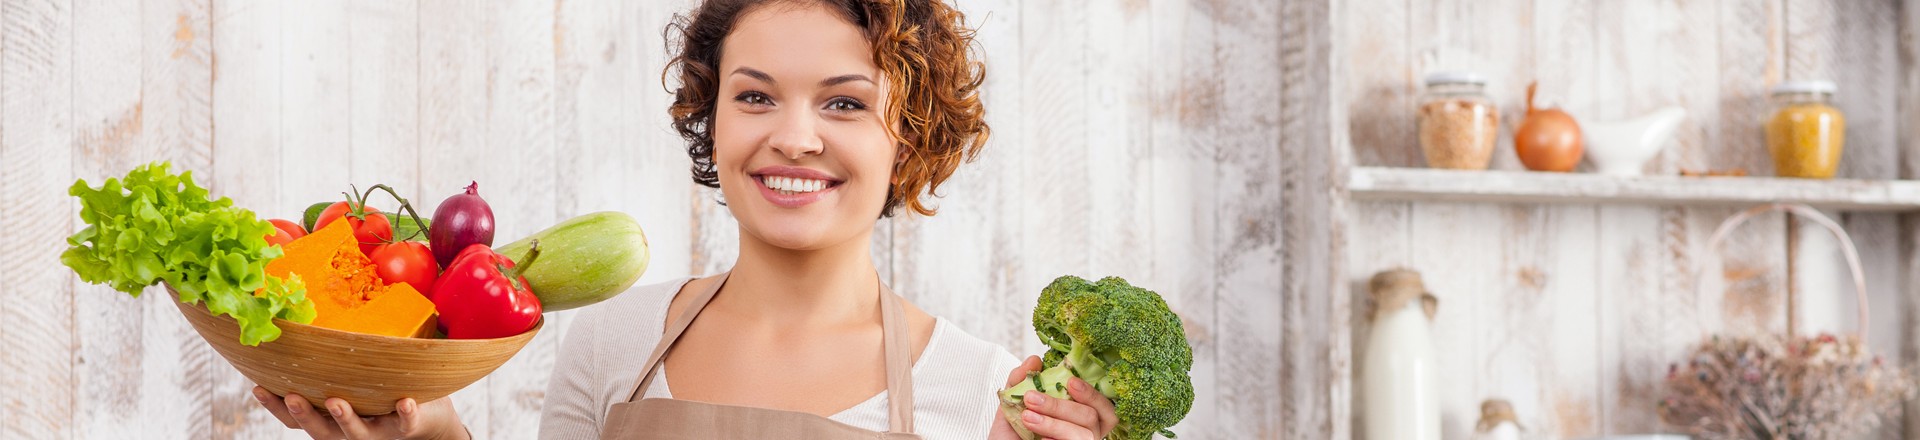 is a vegetarian diet good for heart health?